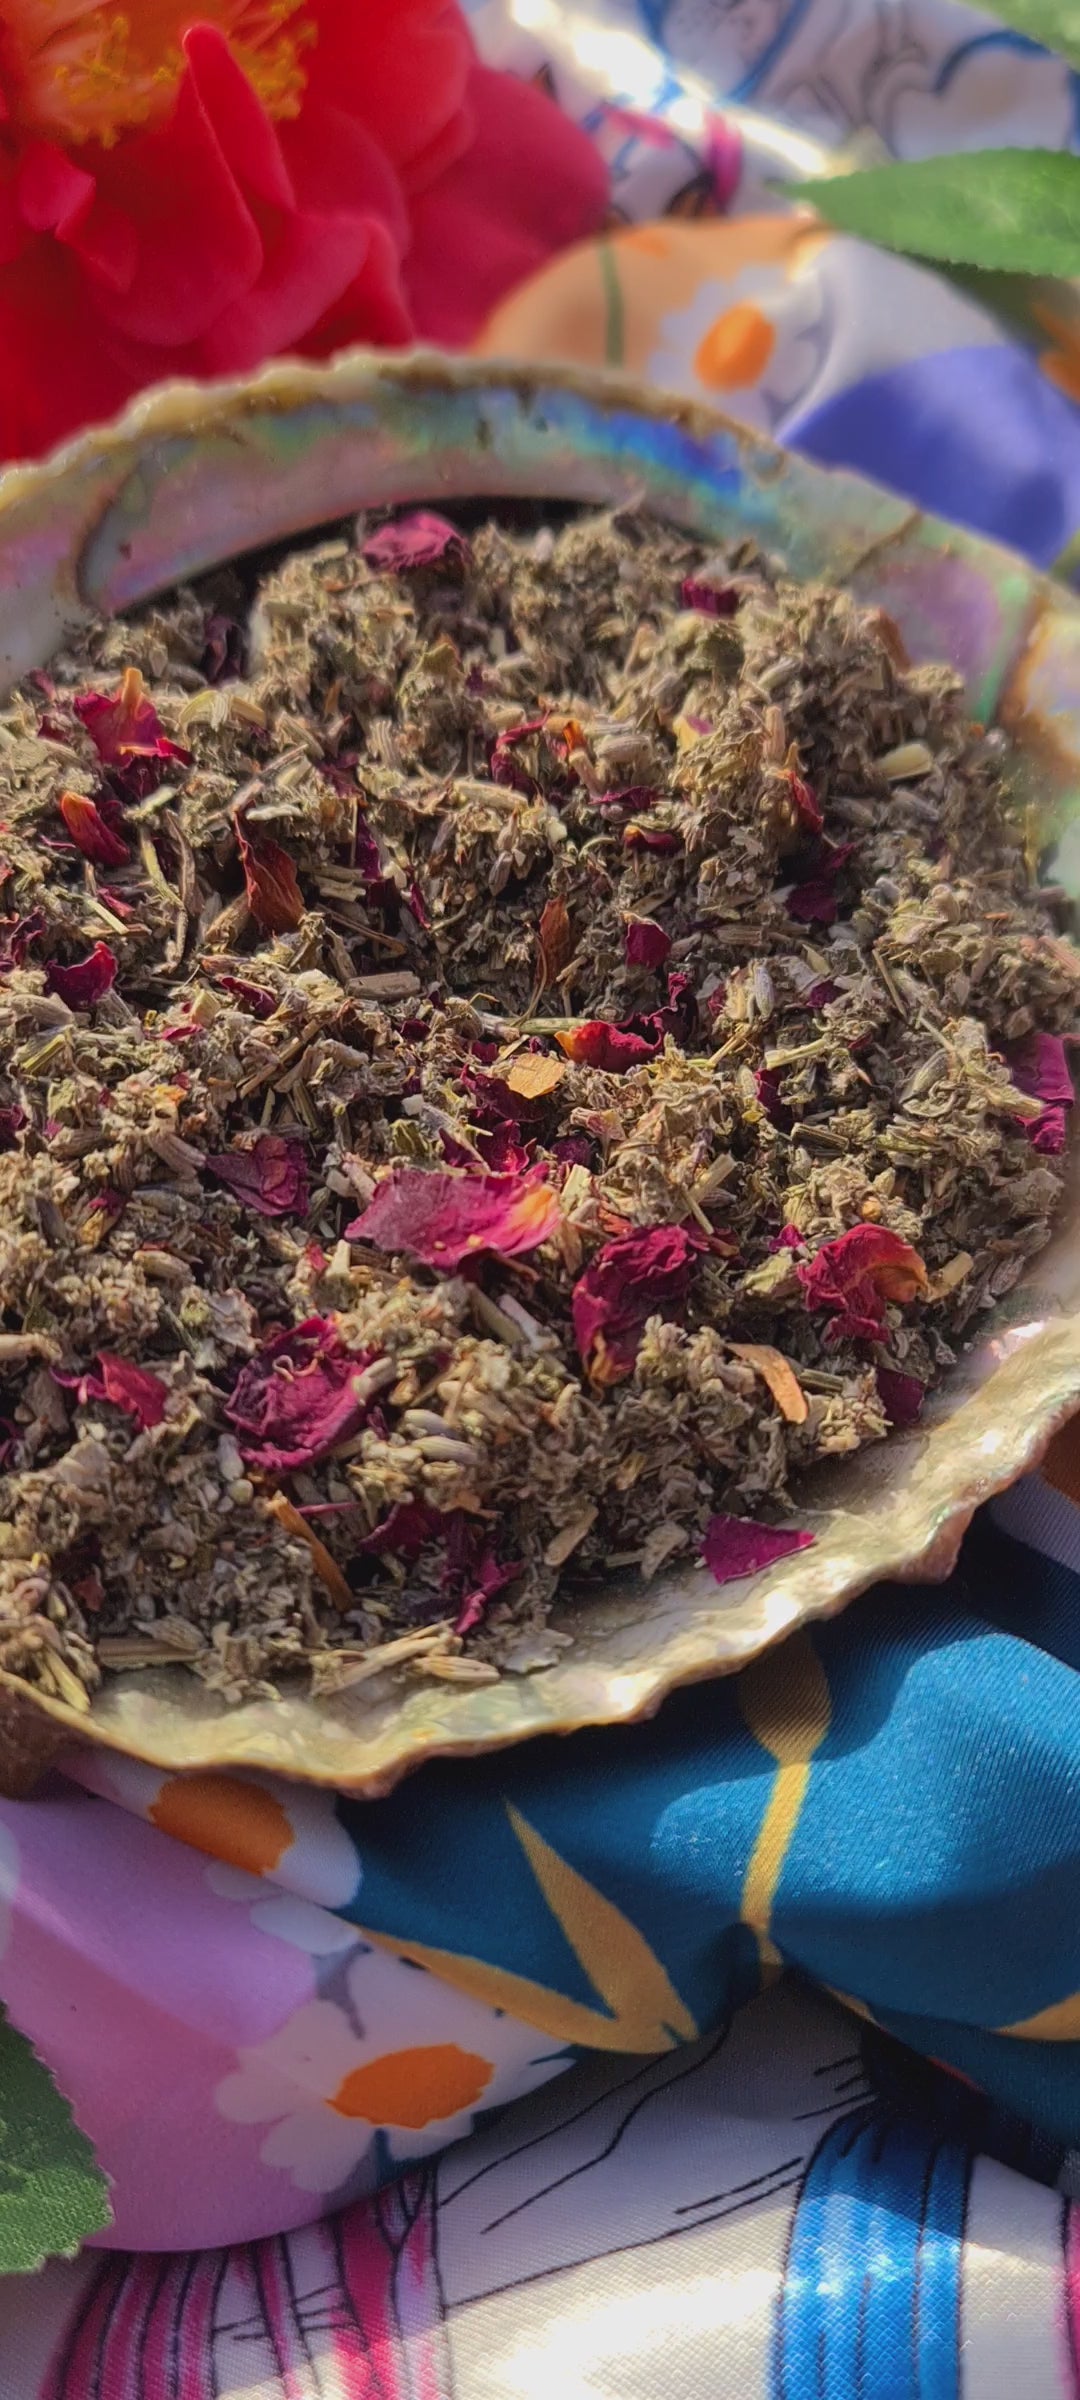 A captivating video of The Dreamy Blend in an iridescent abalone shell, featuring a mixture of green raspberry leaf and mugwort, beautifully accented with specks of rose petals and lavender. Liam is sprinkling the blend into the Abalone Shell.